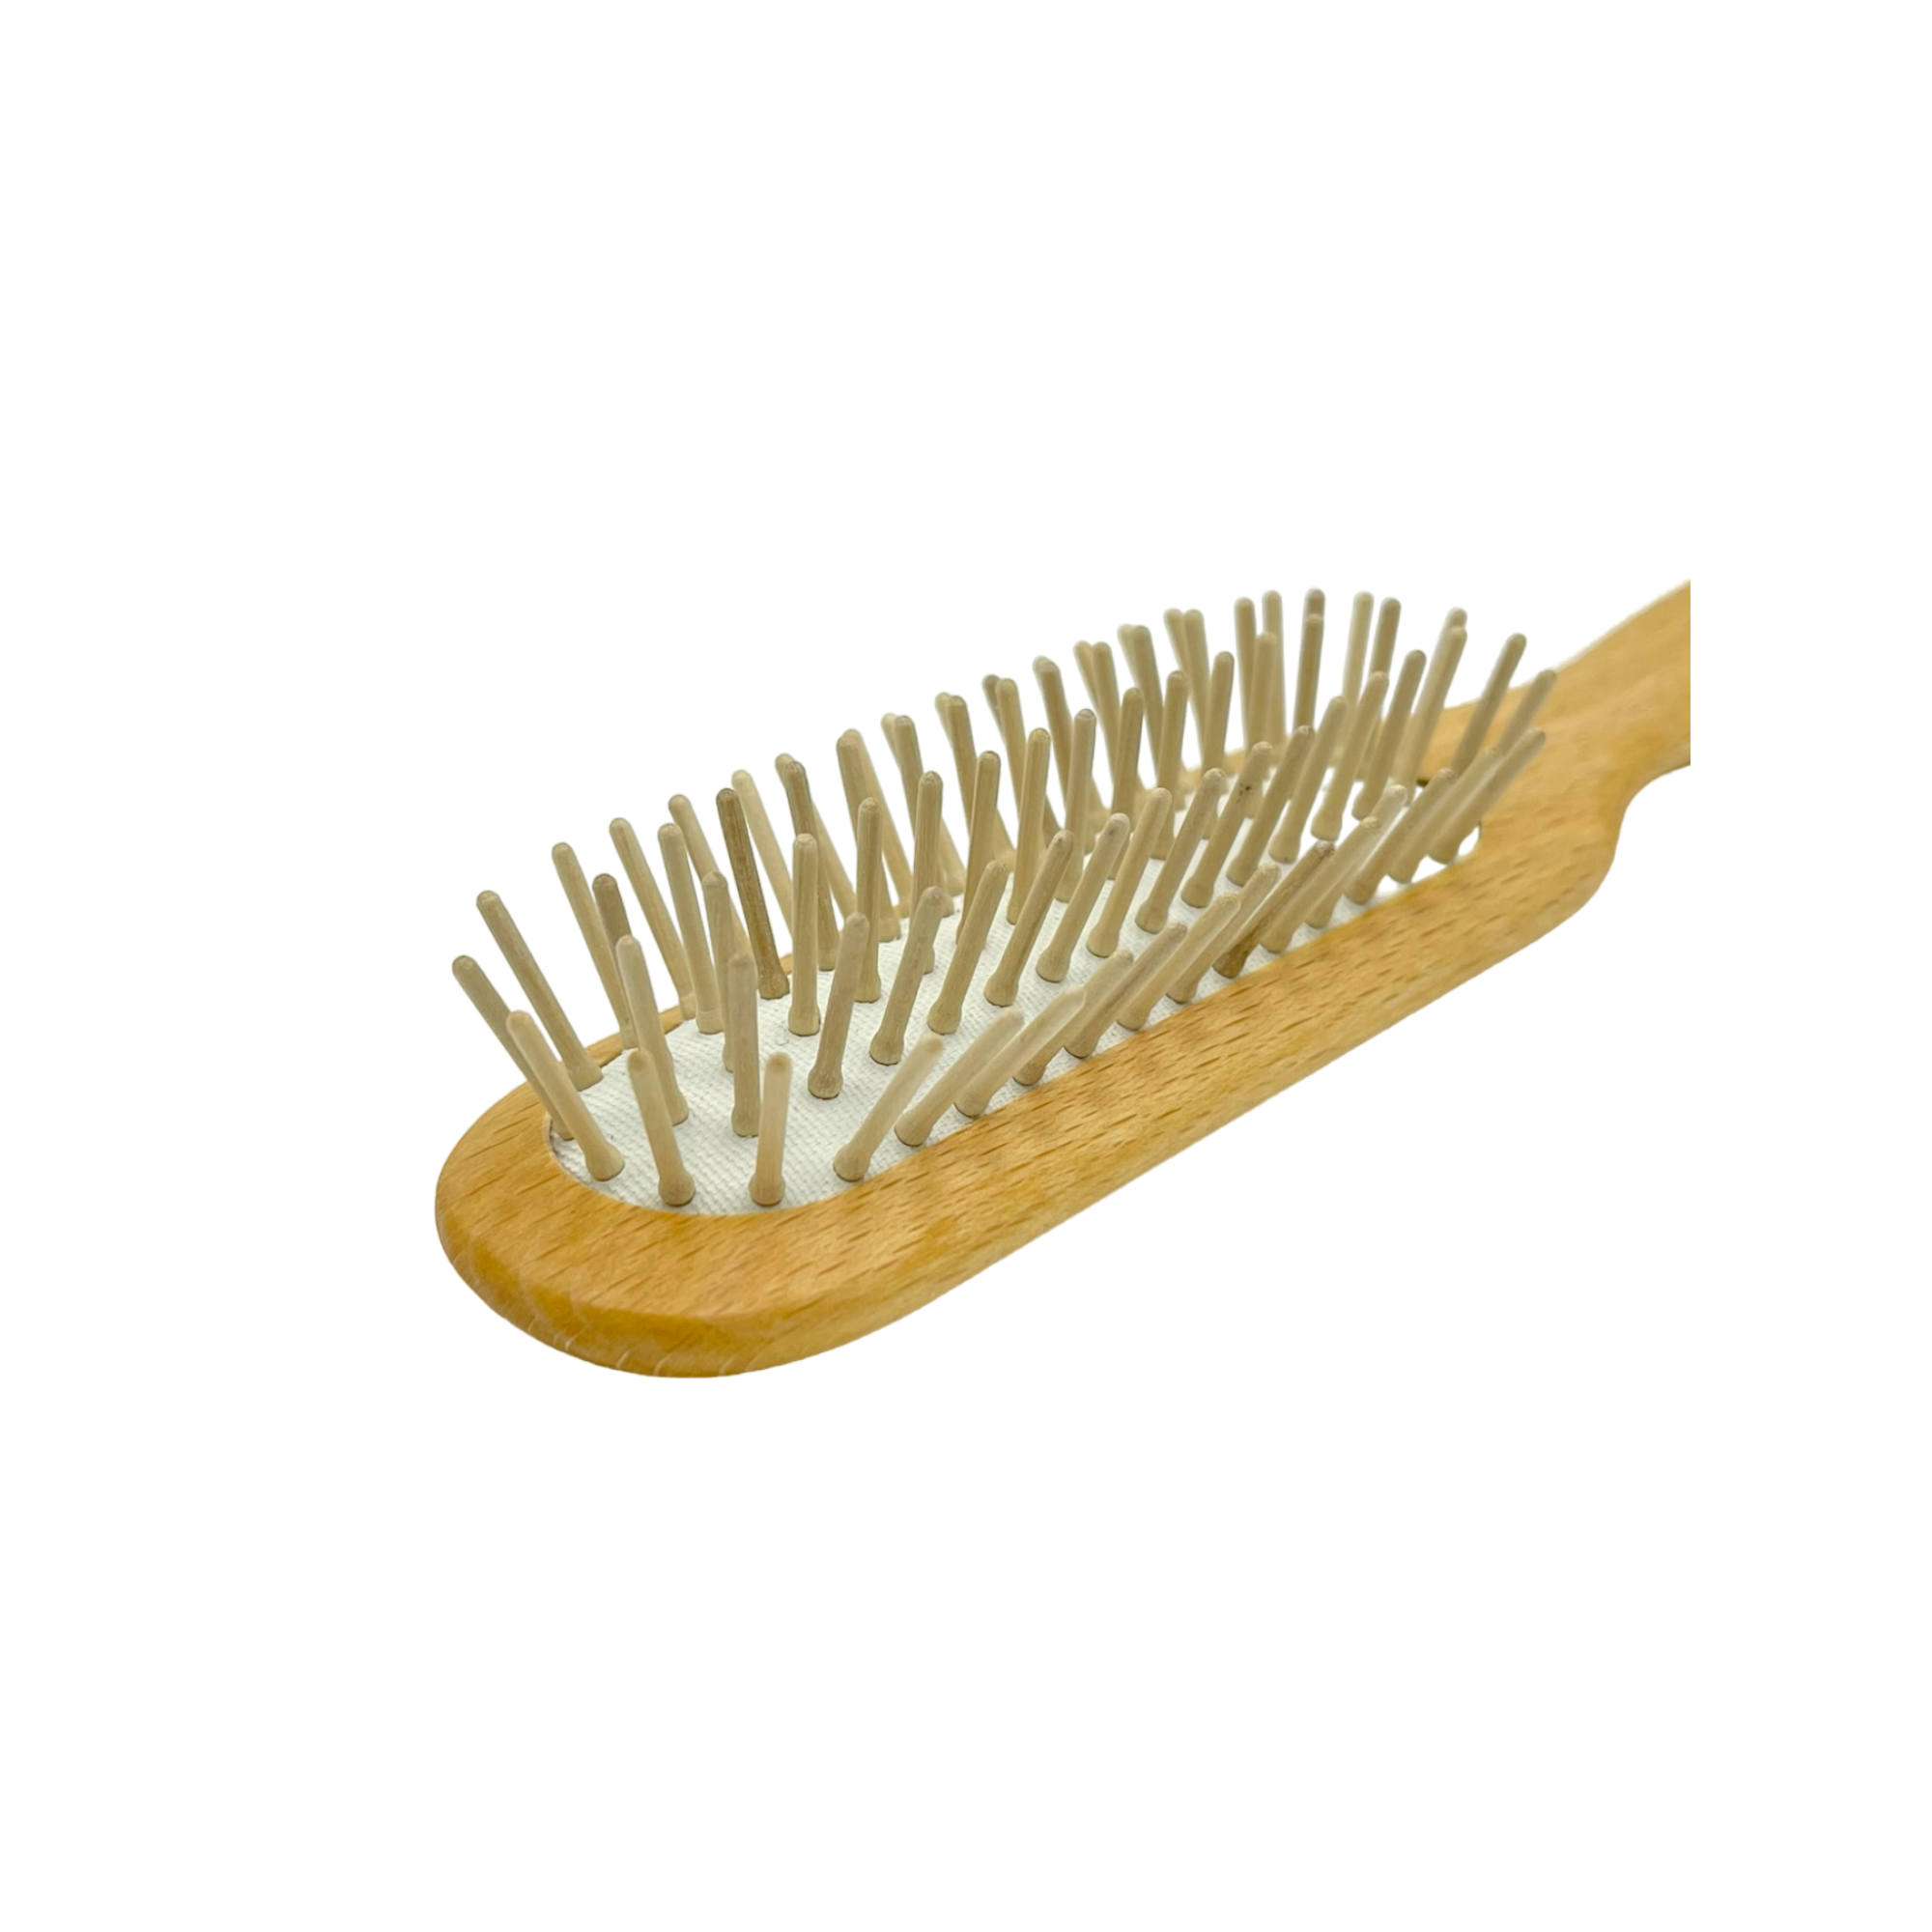 Dural Beech wood rubber cushion hair brush with wooden pins